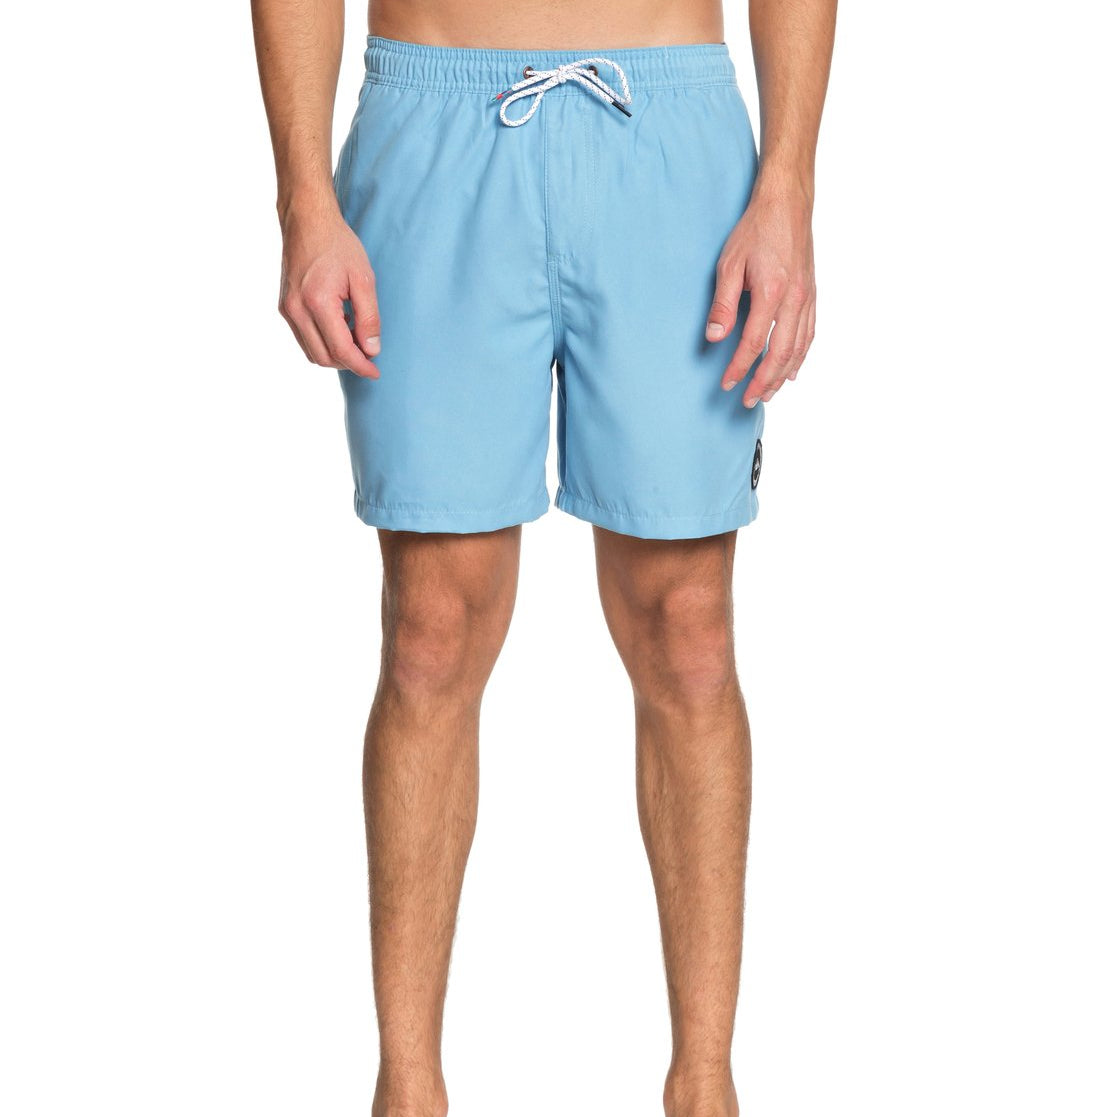 Quiksilver Every Day 17" Volley Shorts BJB0-BLUE S